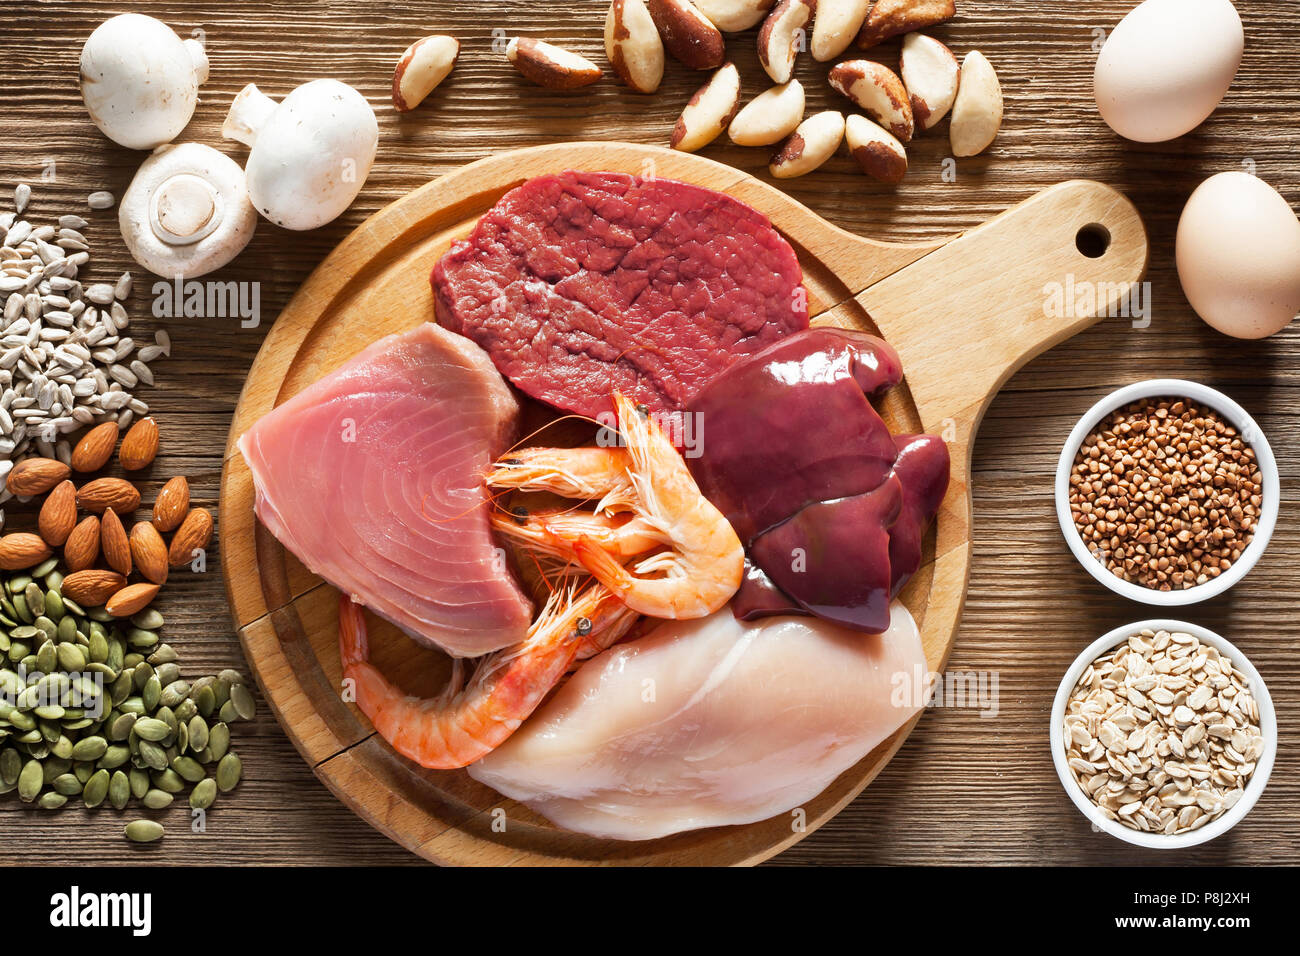 Foods High in Selenium as brasil nuts, tuna, shrimps, beef, liver, mushrooms, pumpkin seeds, sunflower seeds, buckwheat, oatmeal, almonds and eggs. To Stock Photo